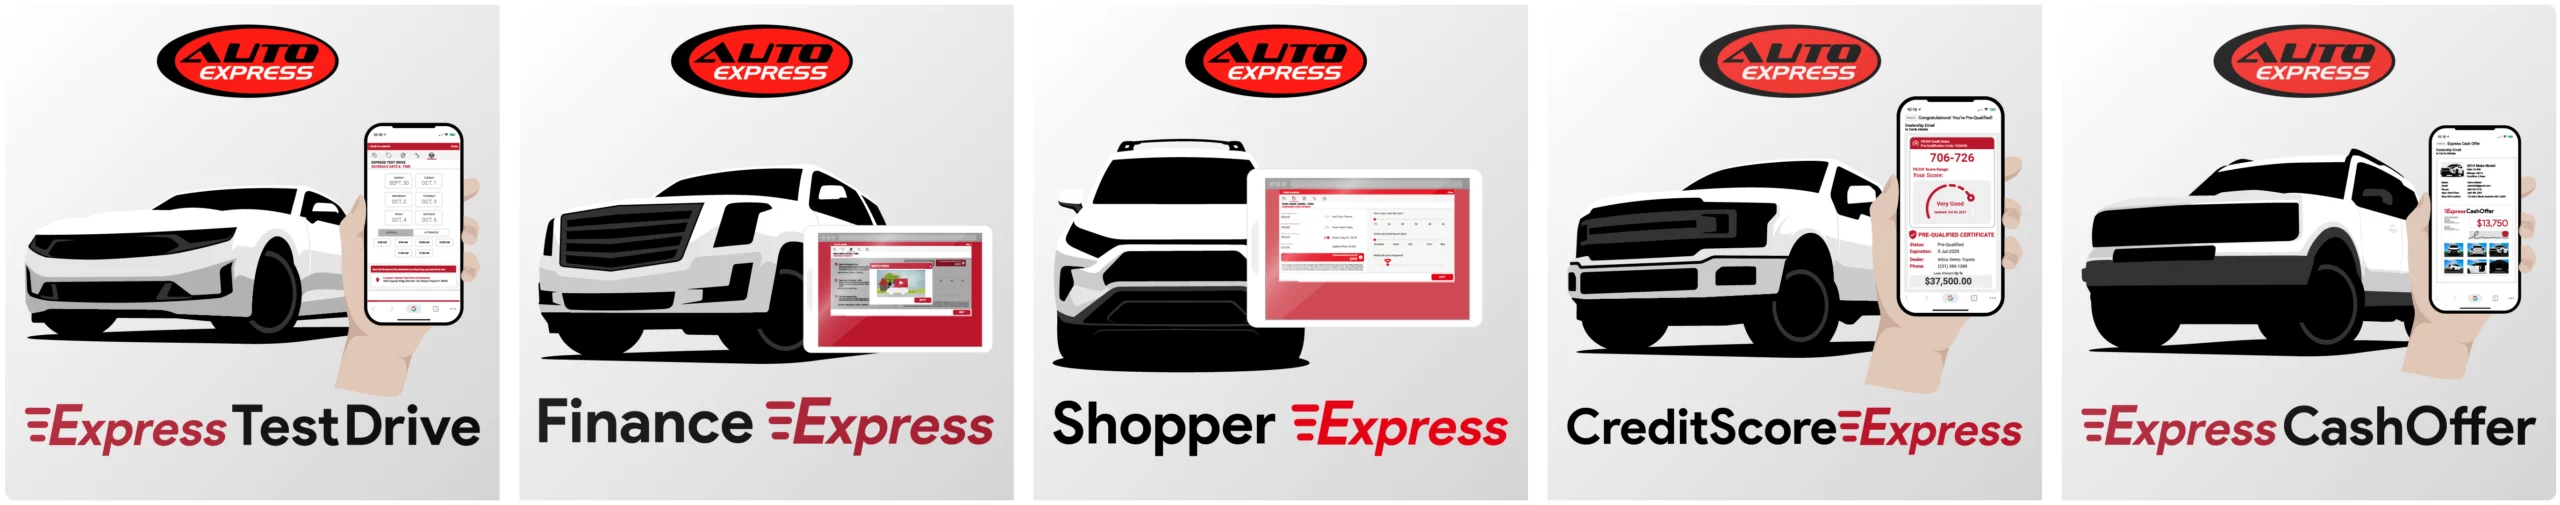 Why buy from auto express?